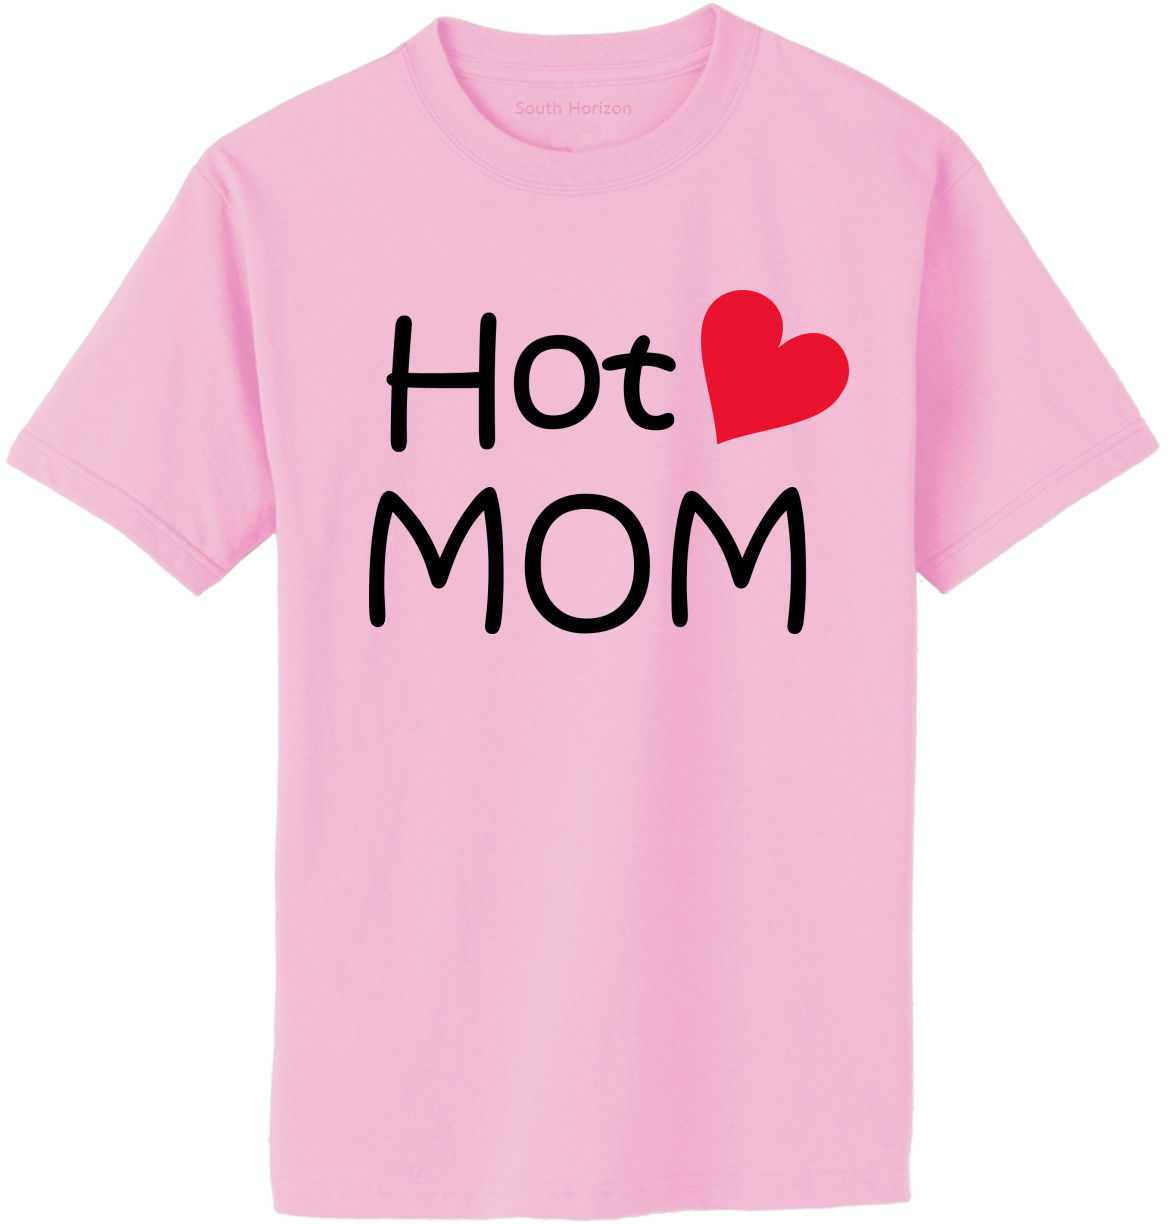 Hot Mom on Adult T-Shirt